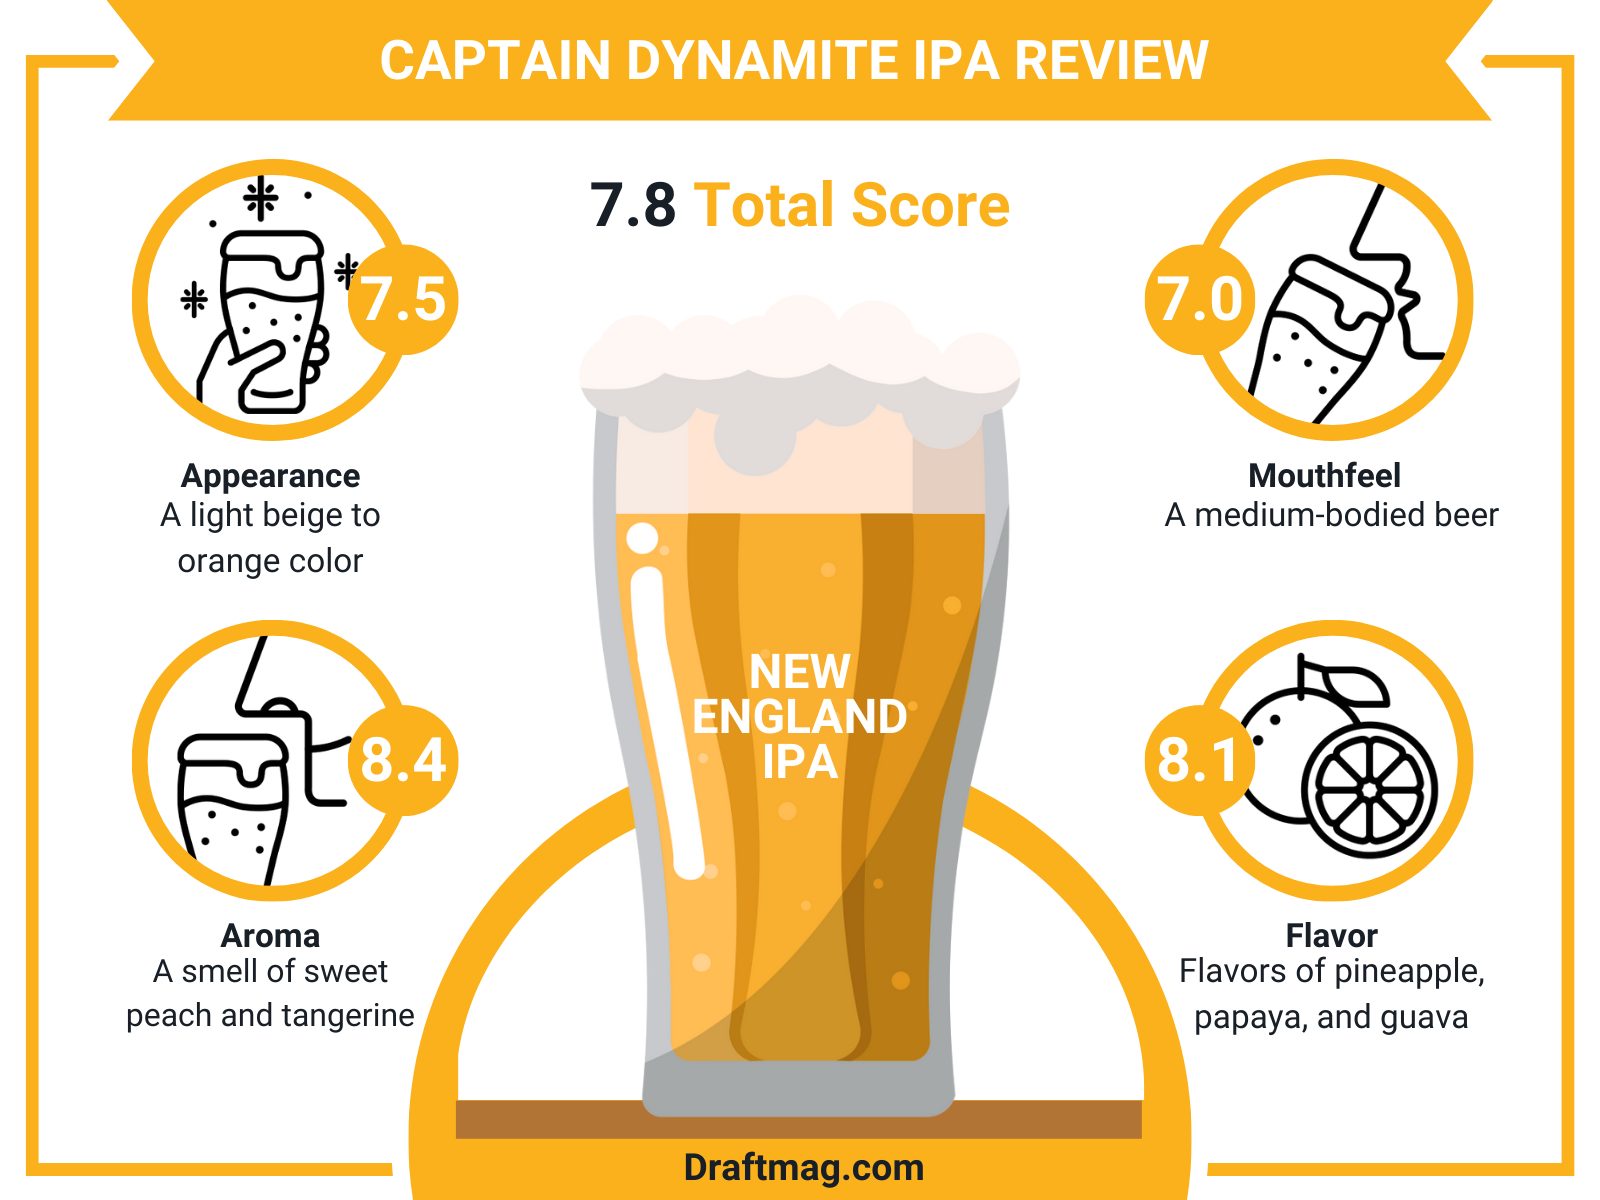 Captain Dynamite Review Infographic